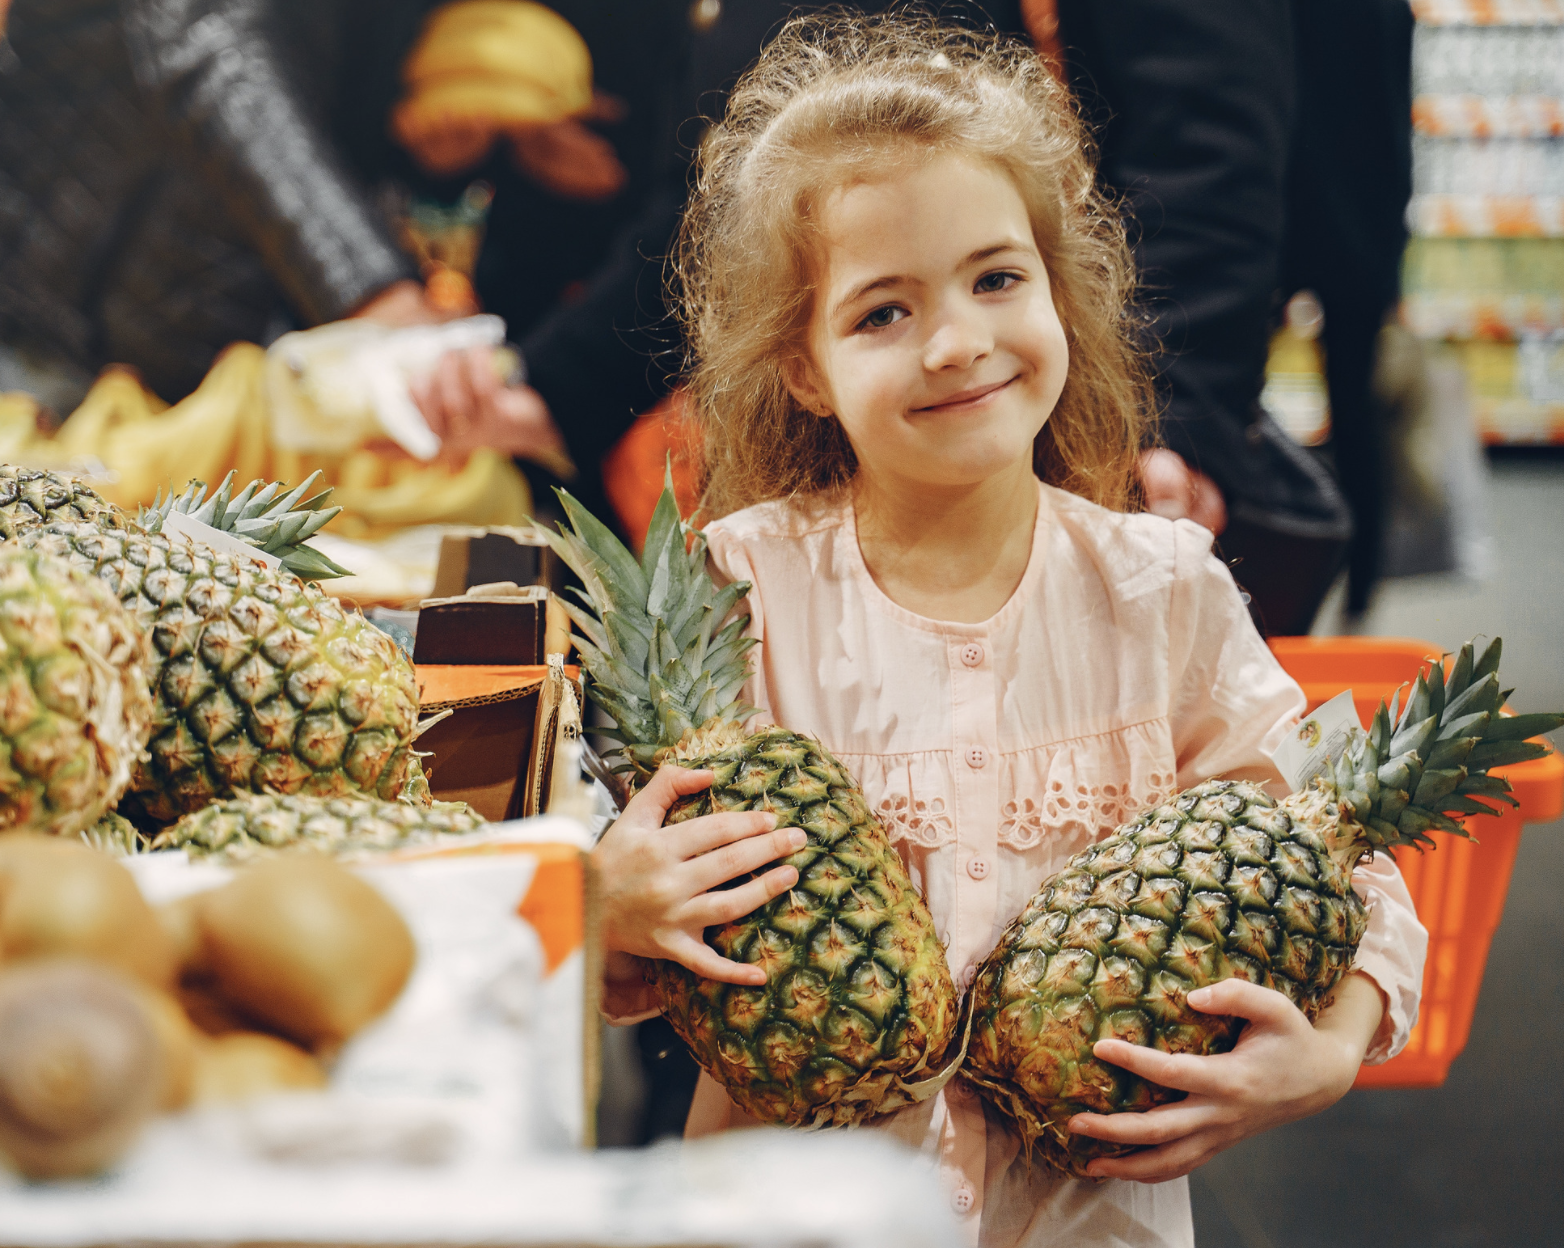 Say Aloha to fun learning with a pineapple! Read on to learn how pineapple can be used to teach your kids geography, history, nutrition, science and more! #pineapples #education #summerlearning #kids #funforkids #kidsactivities #summeractivities #homeschooling